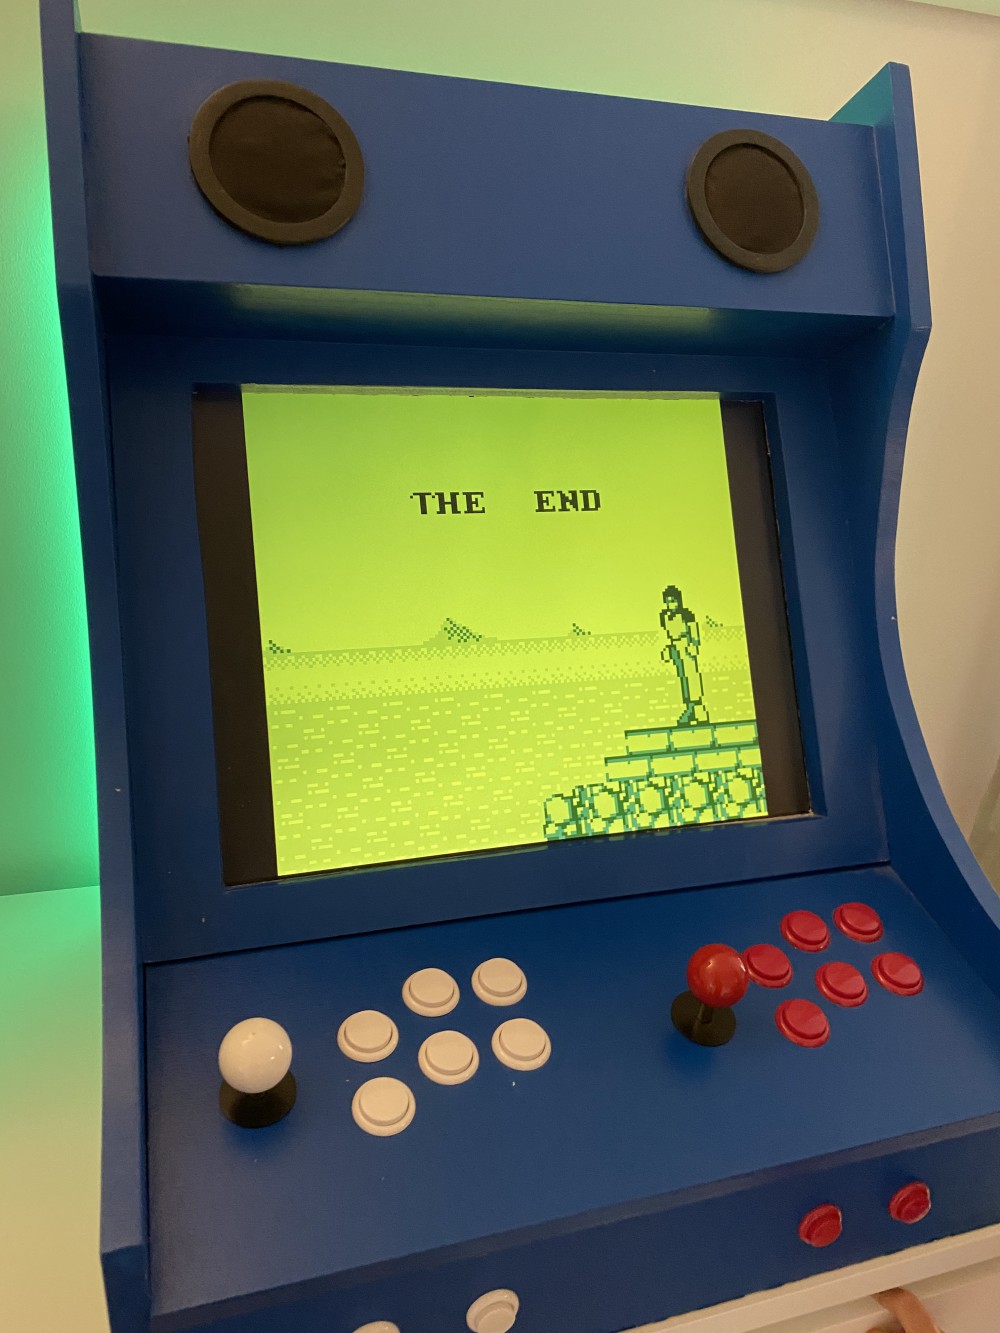 End screen of Kung Fu Master on my DIY arcade